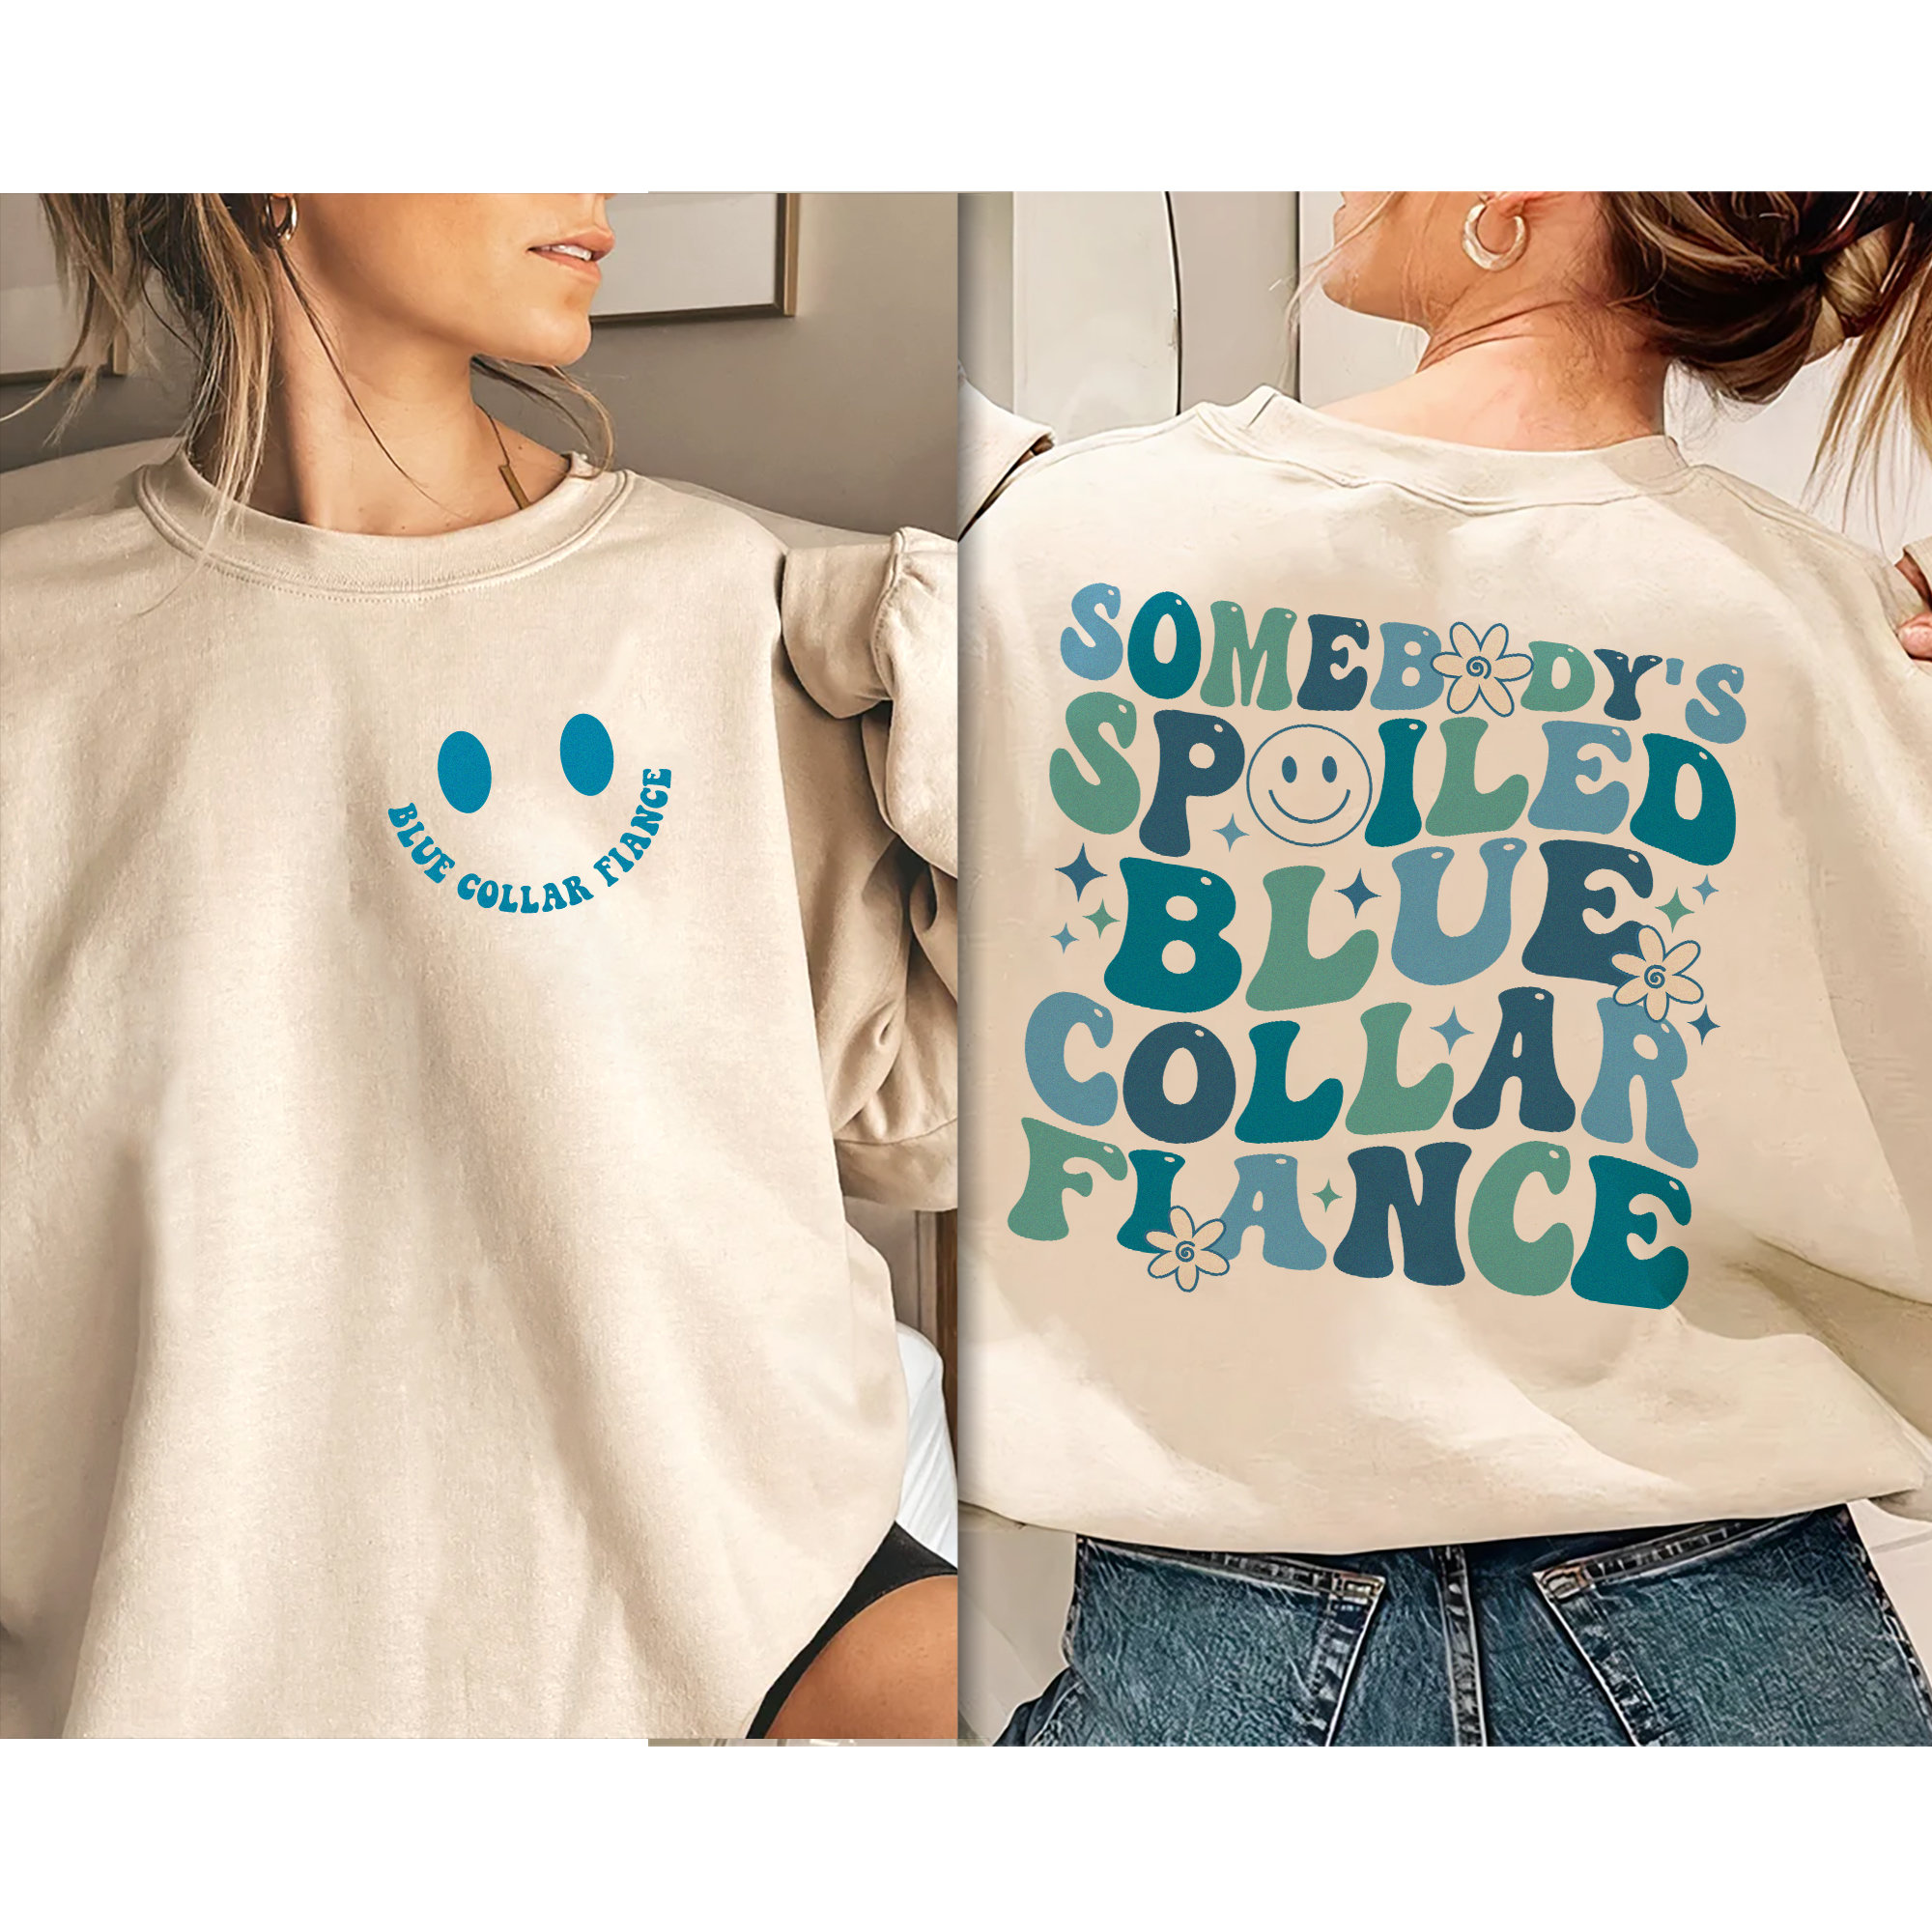 Somebody’s Spoiled Blue Collar Fiancé Shirt, Gift for Bride-to-Be, Blue Collar Tee, Wives T- Shirt